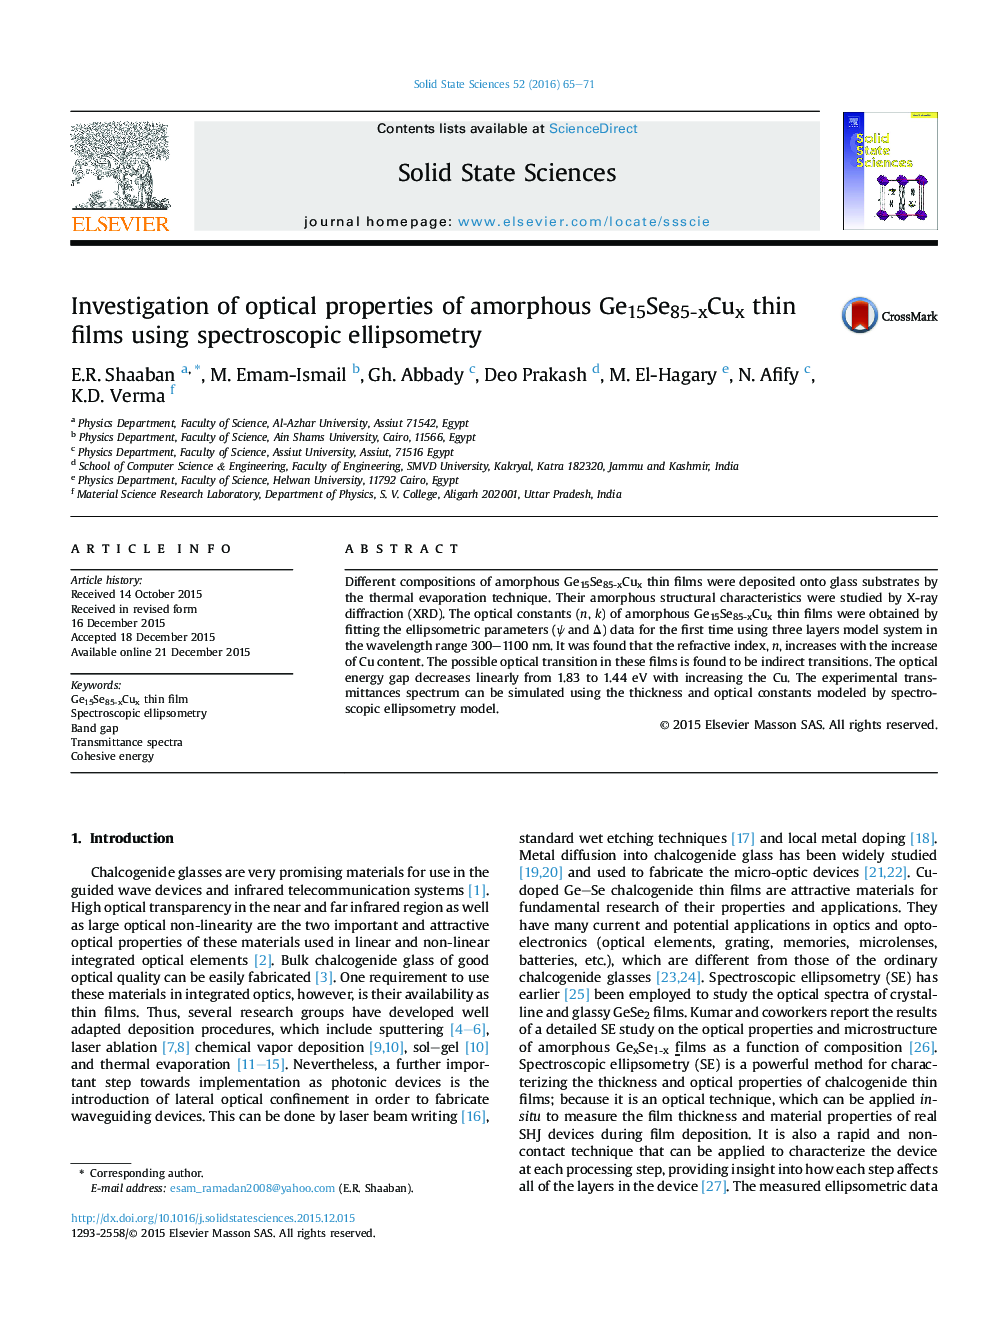 Investigation of optical properties of amorphous Ge15Se85-xCux thin films using spectroscopic ellipsometry